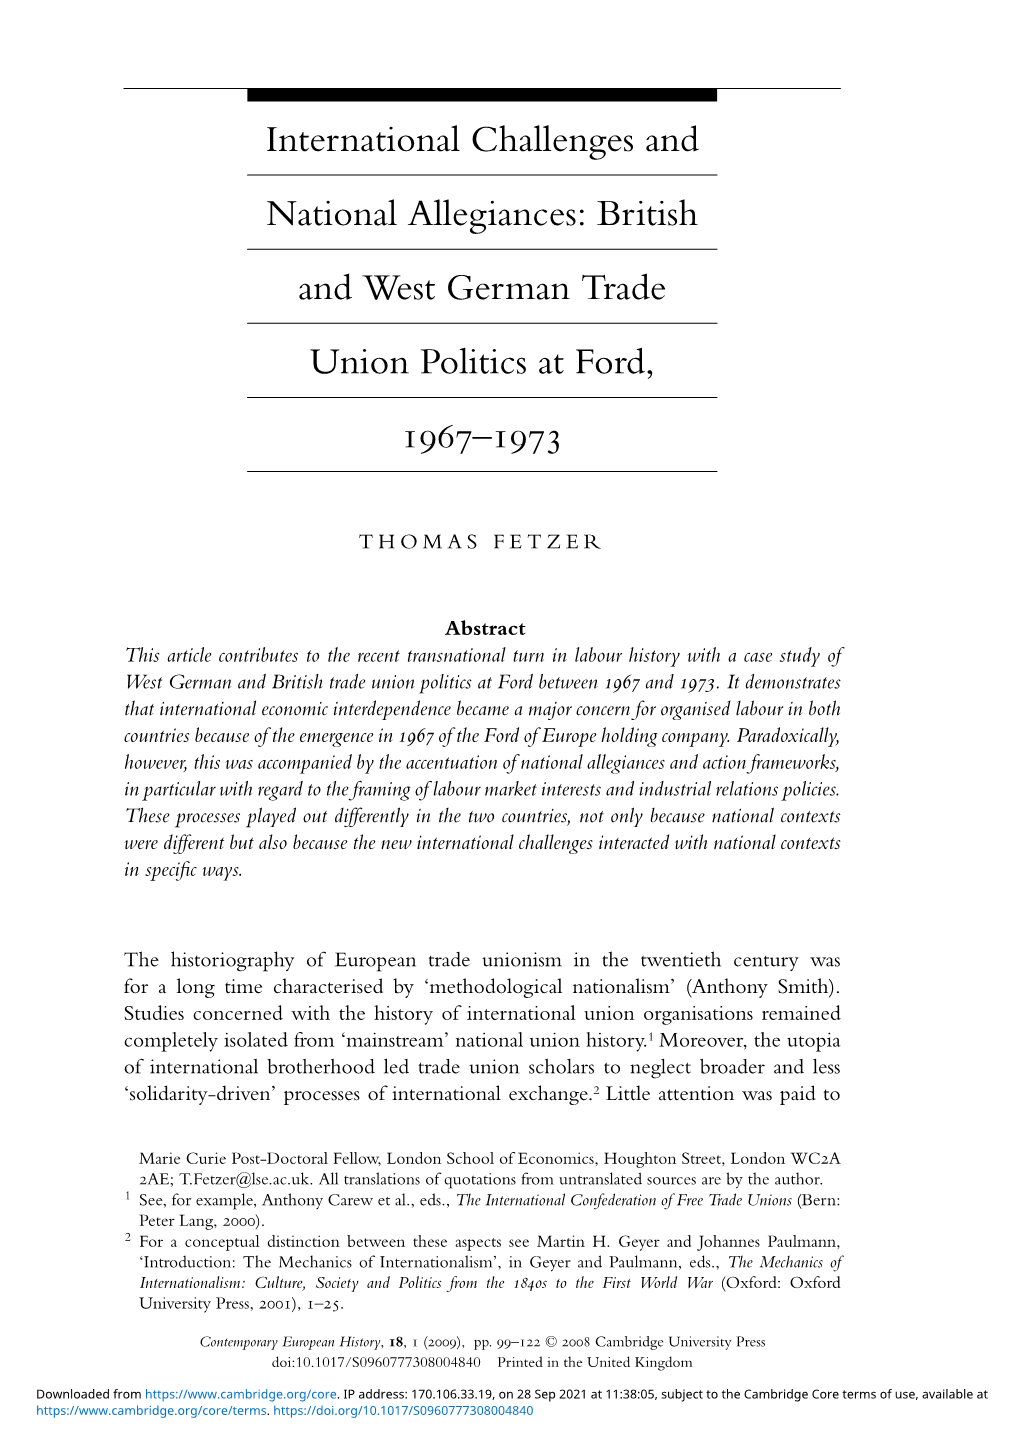 British and West German Trade Union Politics at Ford, 1967–1973